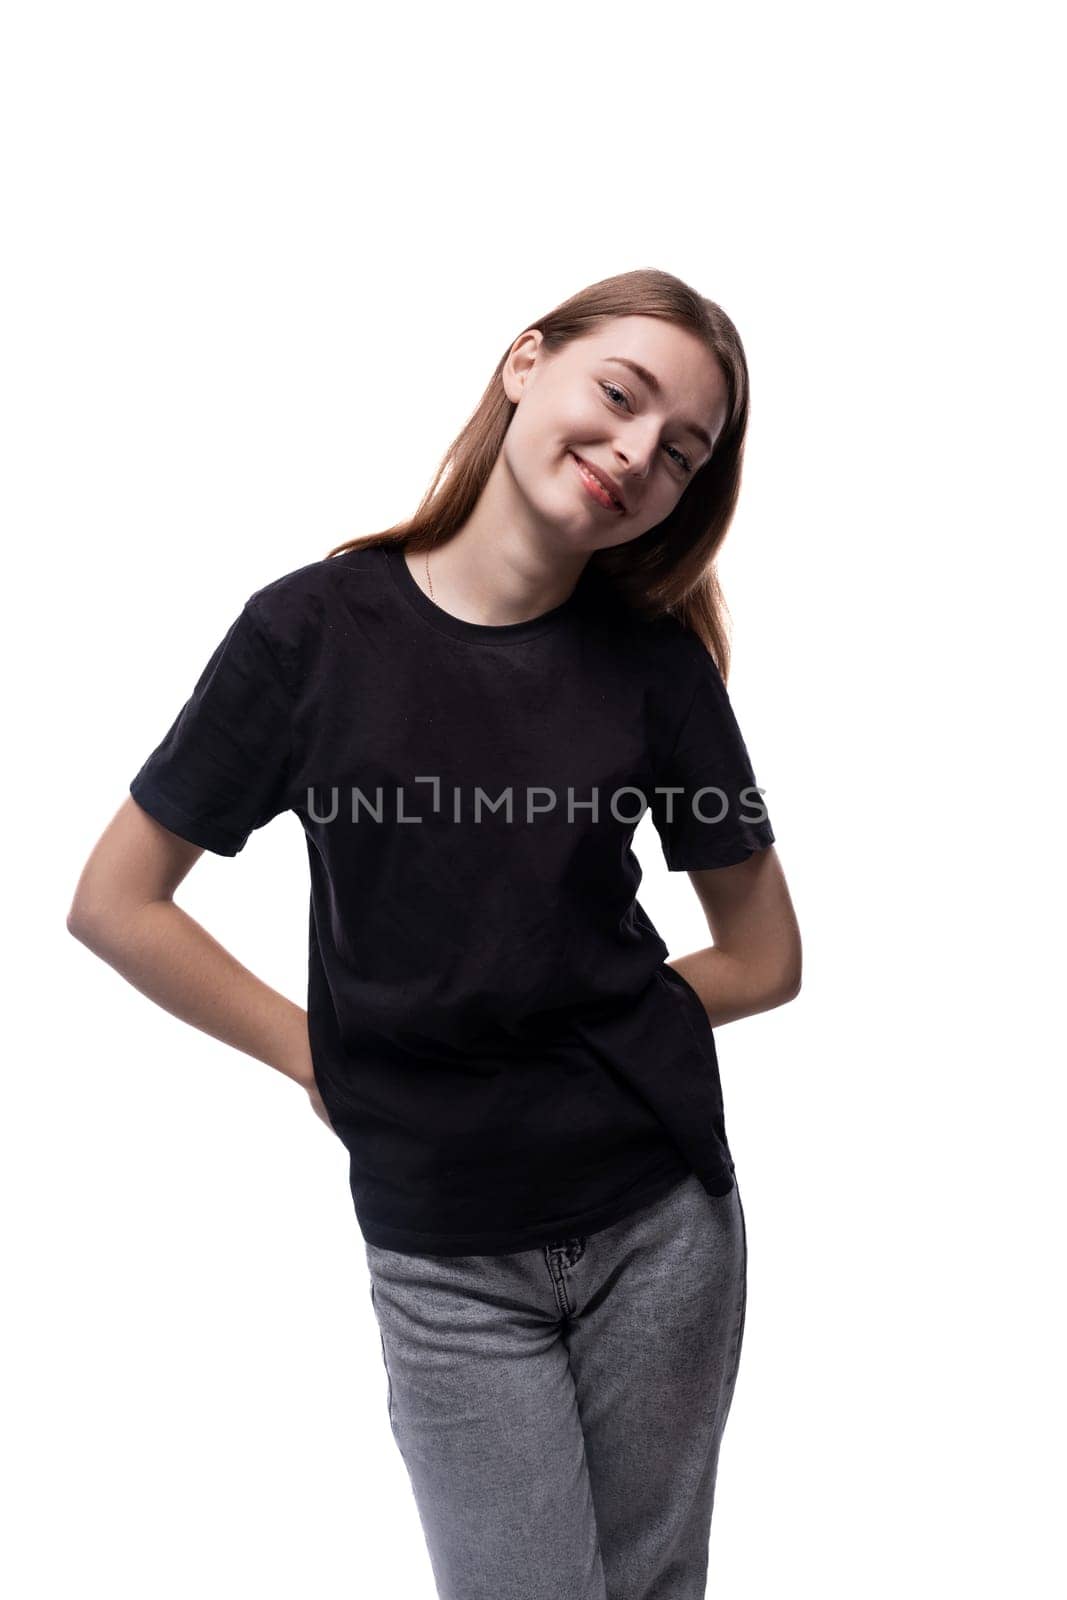 A 15 year old girl with brown hair is wearing a black basic T-shirt by TRMK